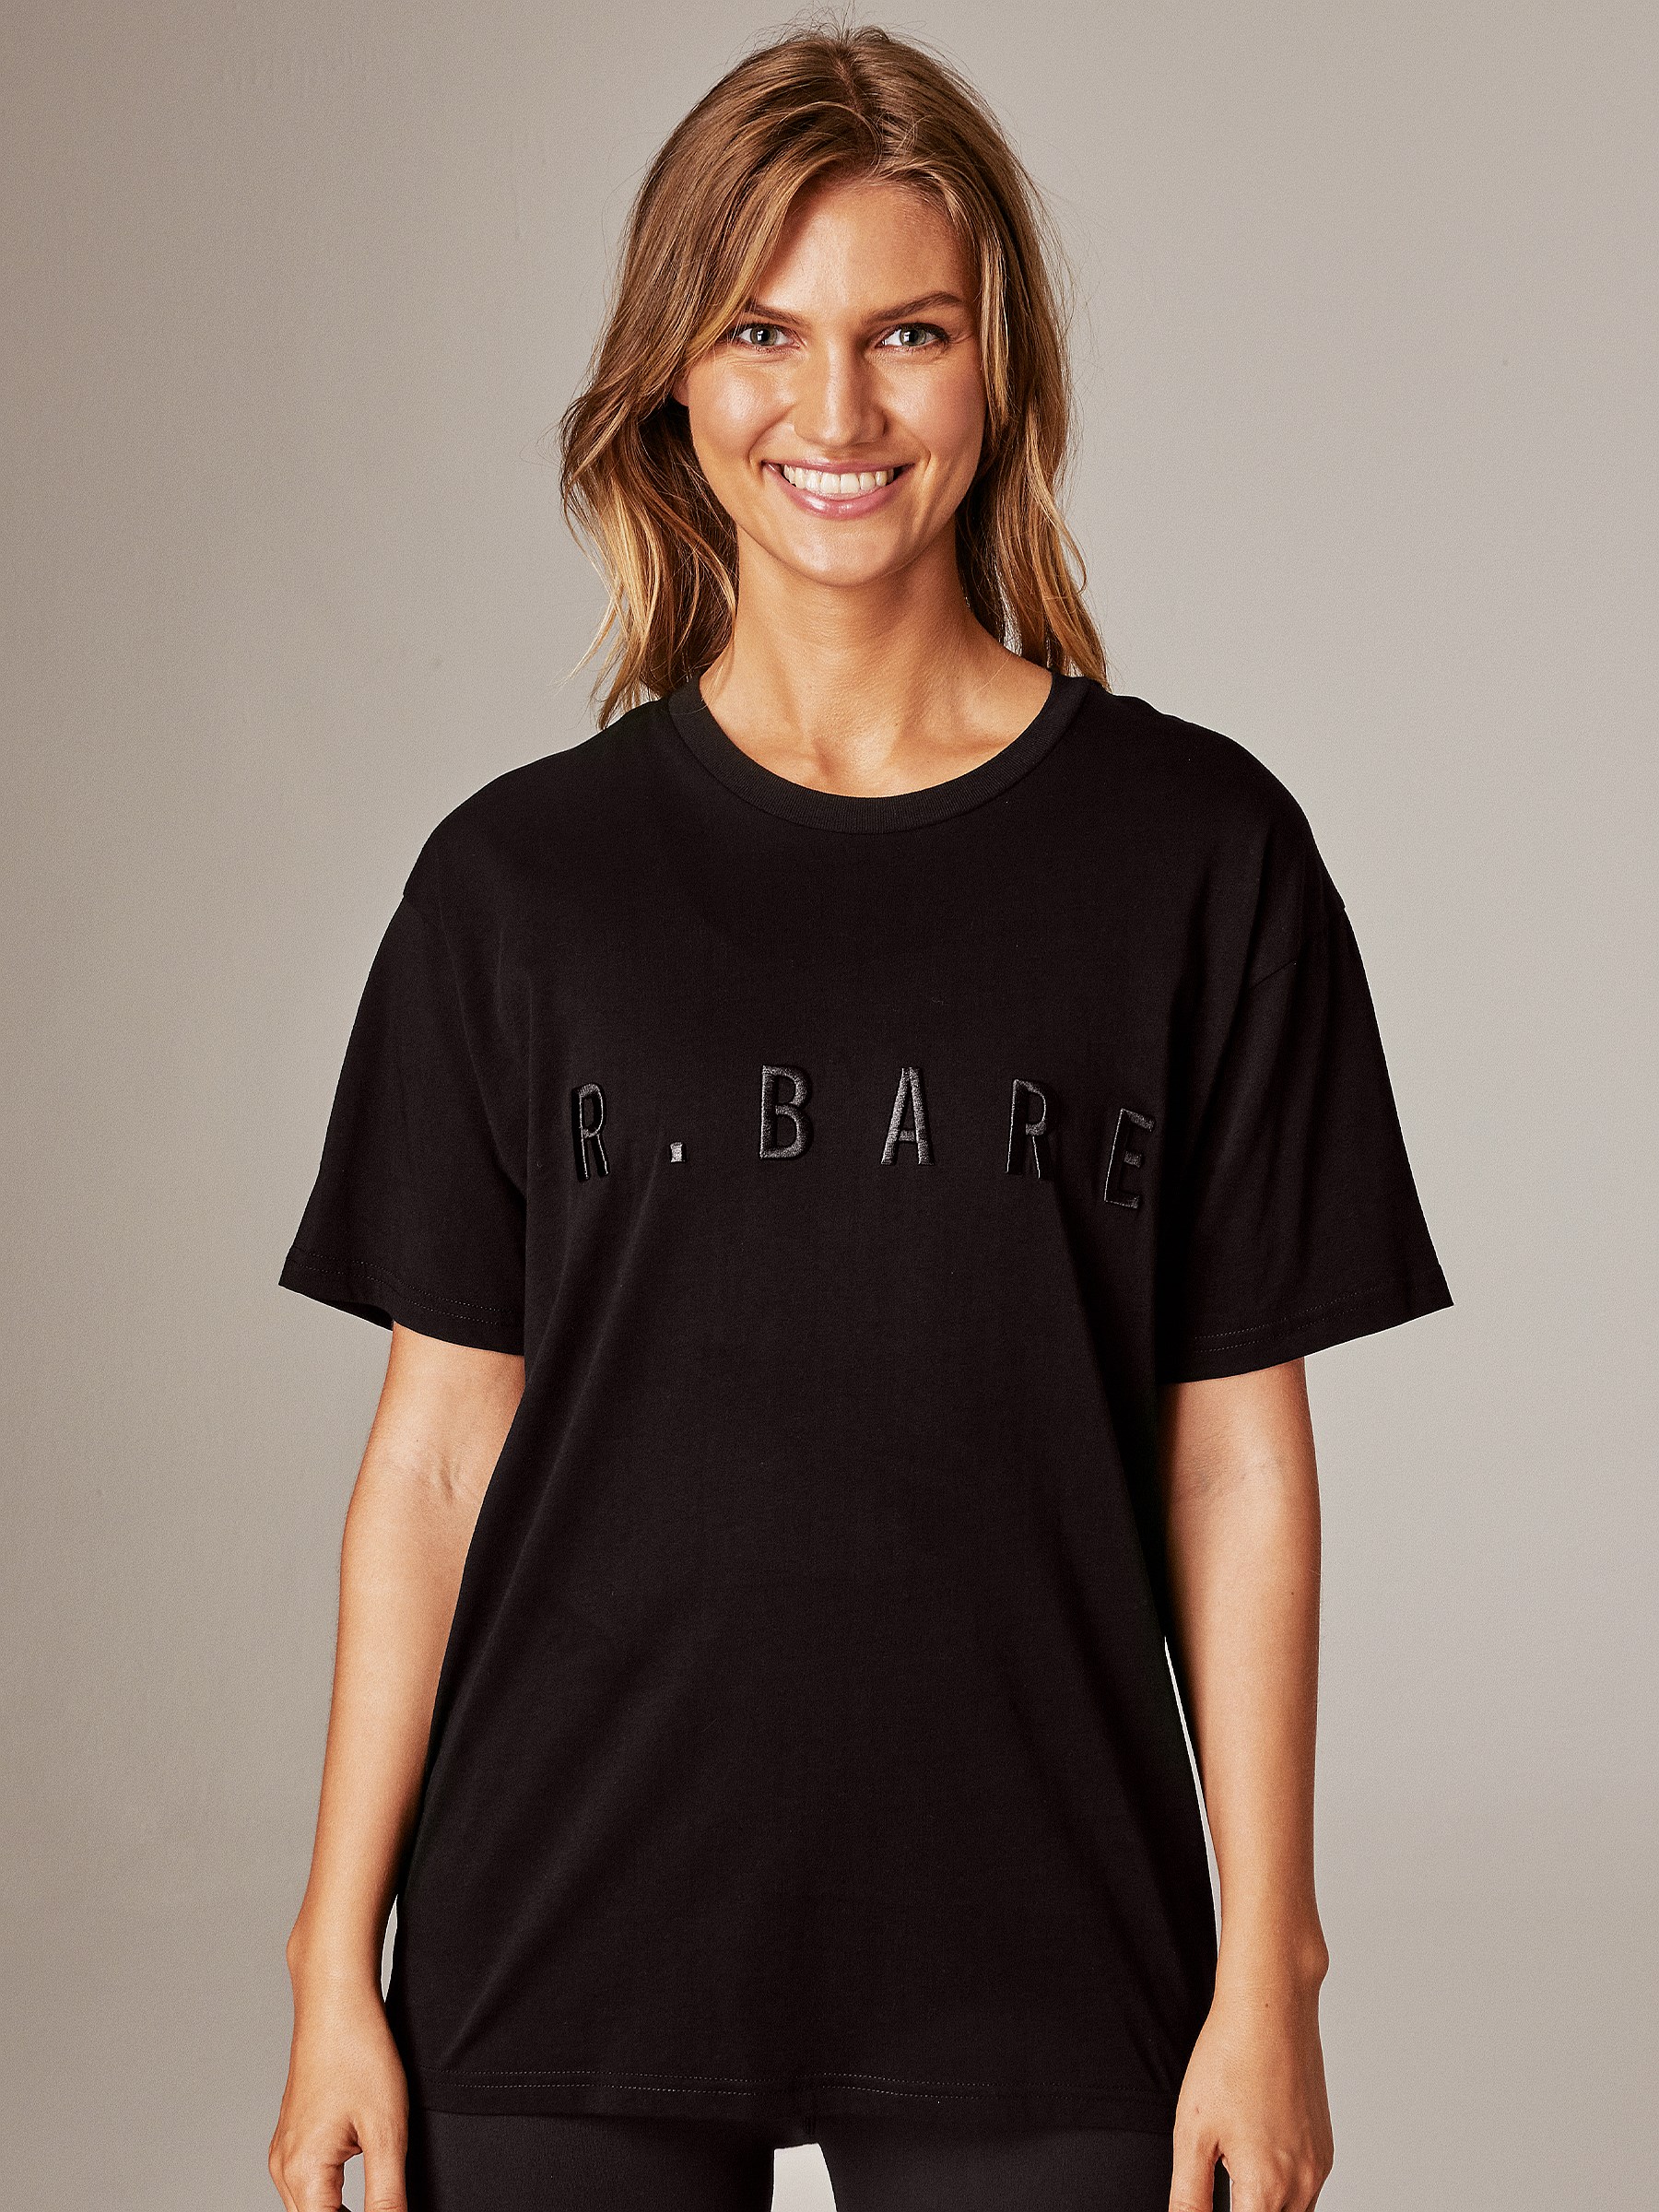 Running Bare Hollywood 90s Tee. Shop Womens Black Gym T-Shirts.